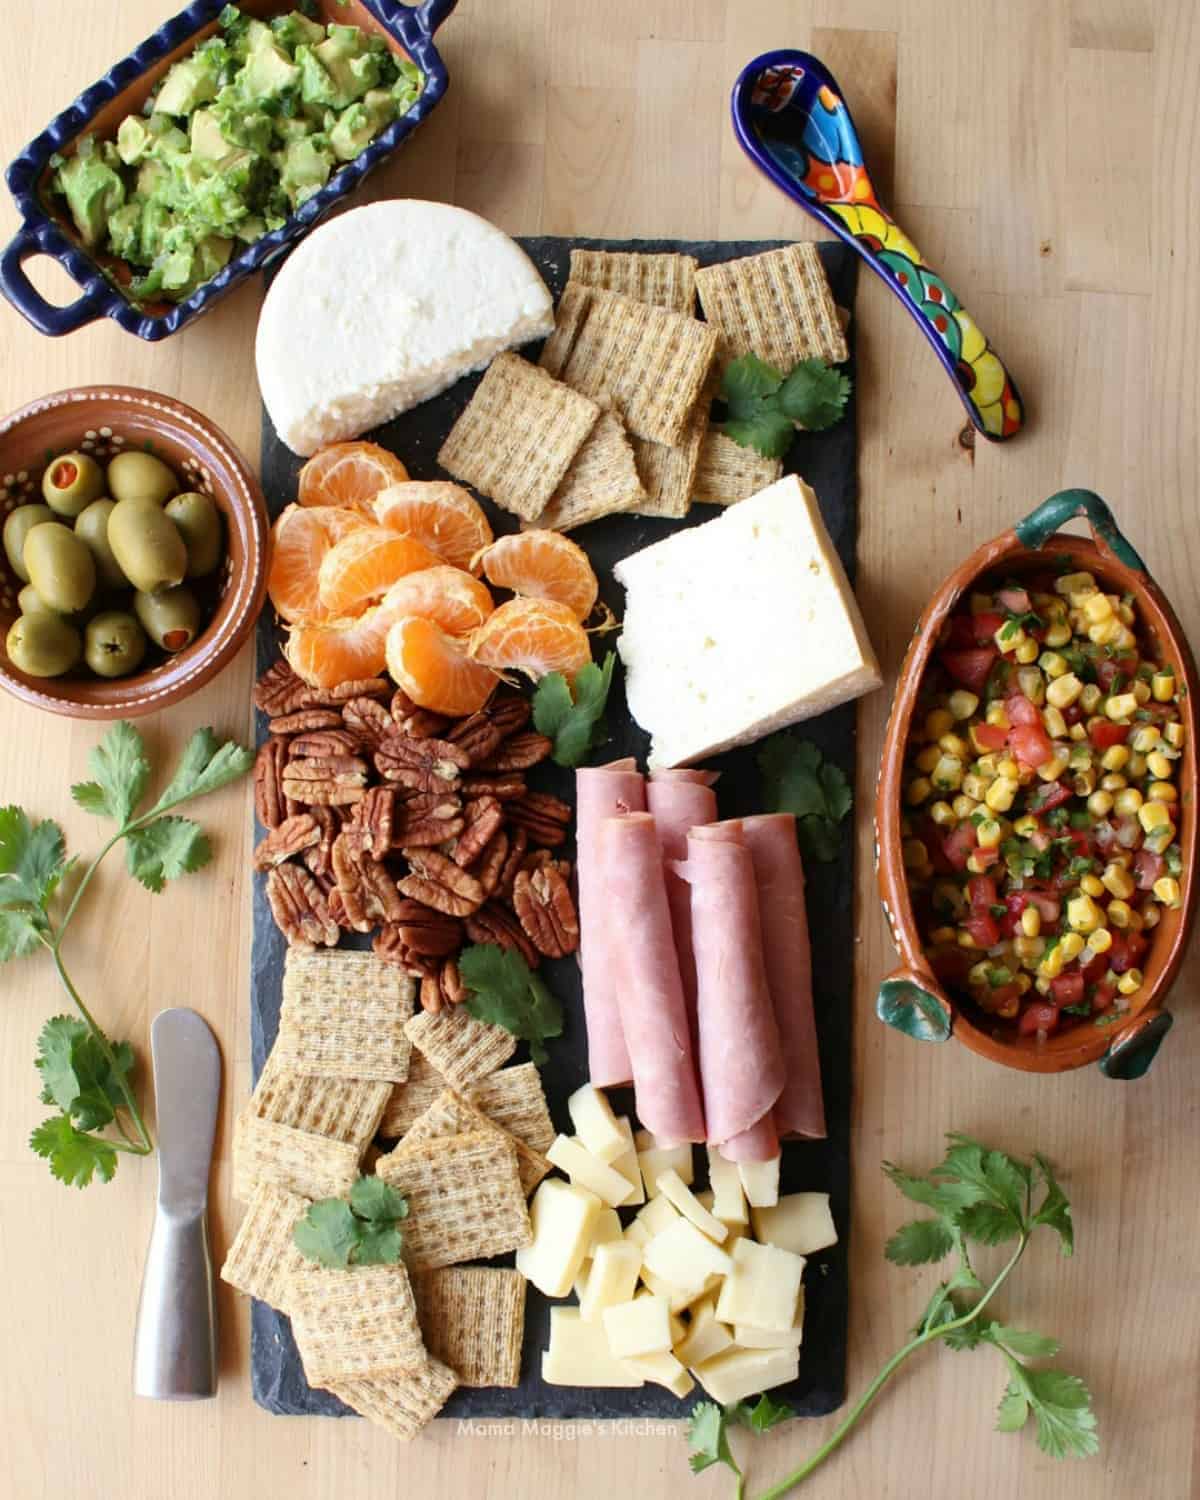 Mexican Charcuterie board with guacamole, con salsa, olives, and different kinds of Mexican cheeses.